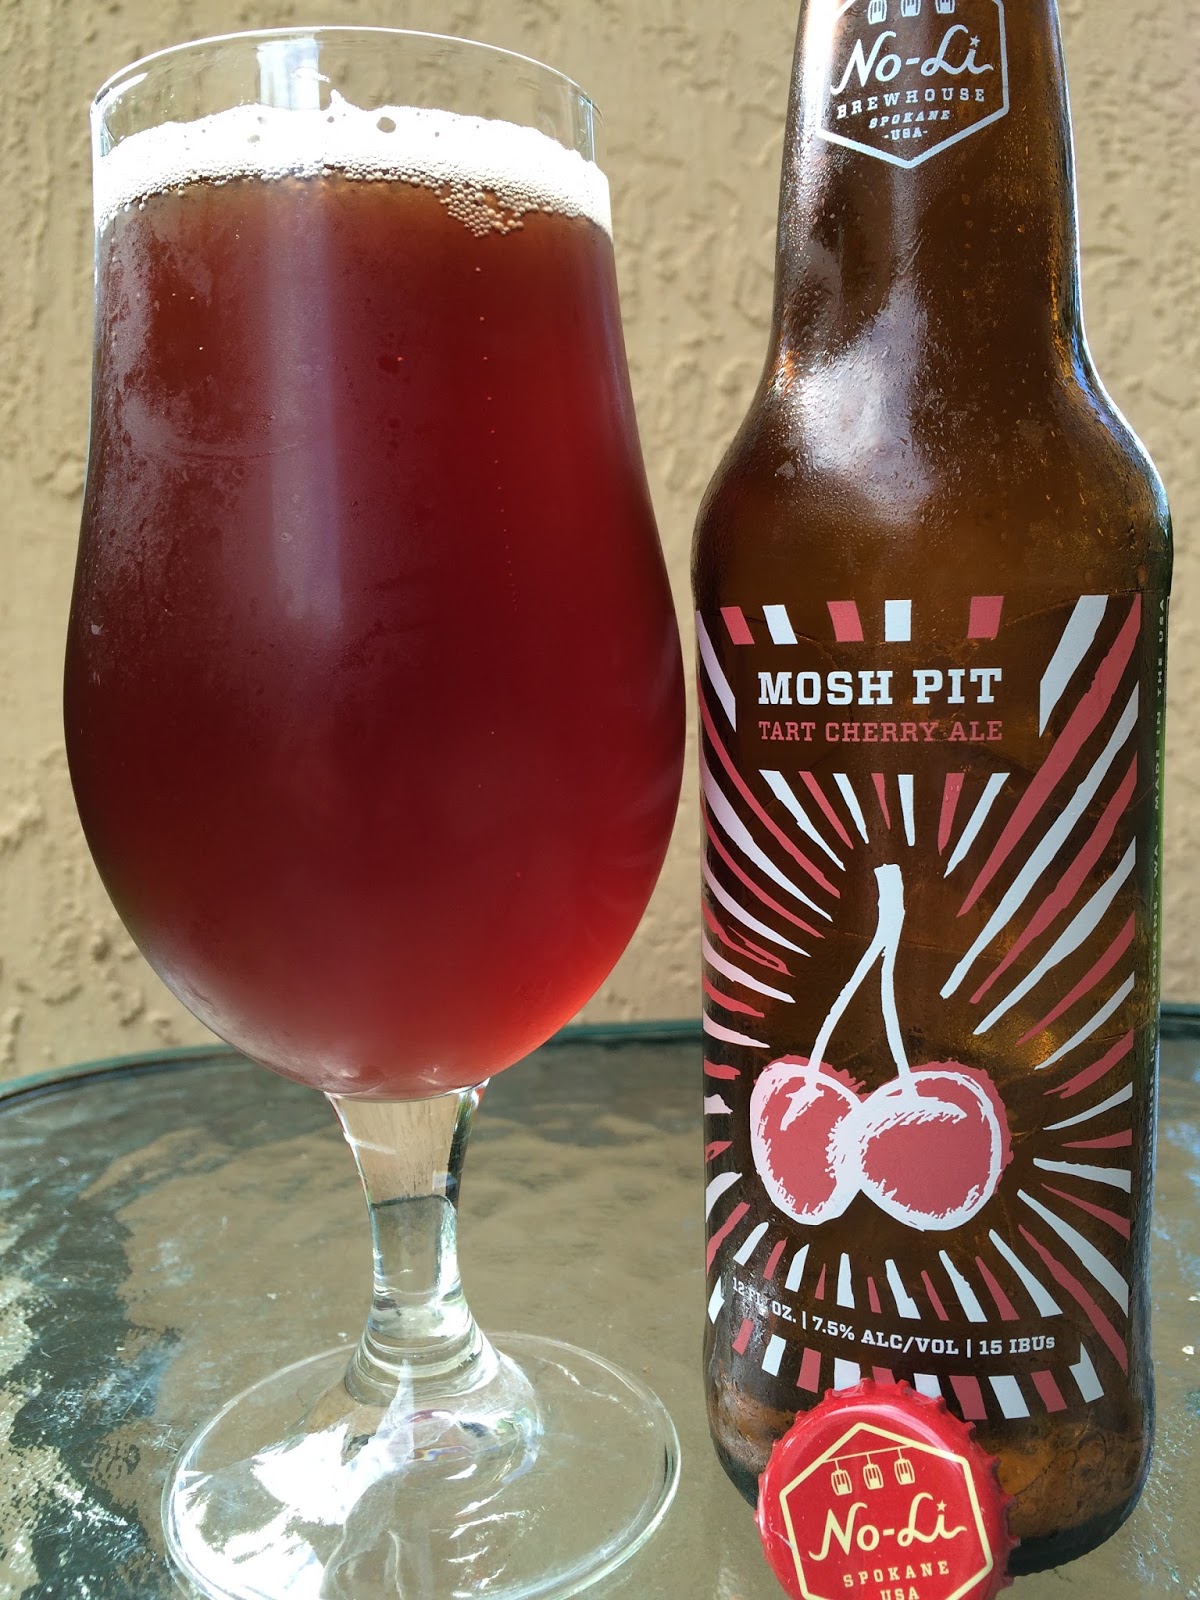 Daily Beer Review: Mosh Pit Tart Cherry Ale